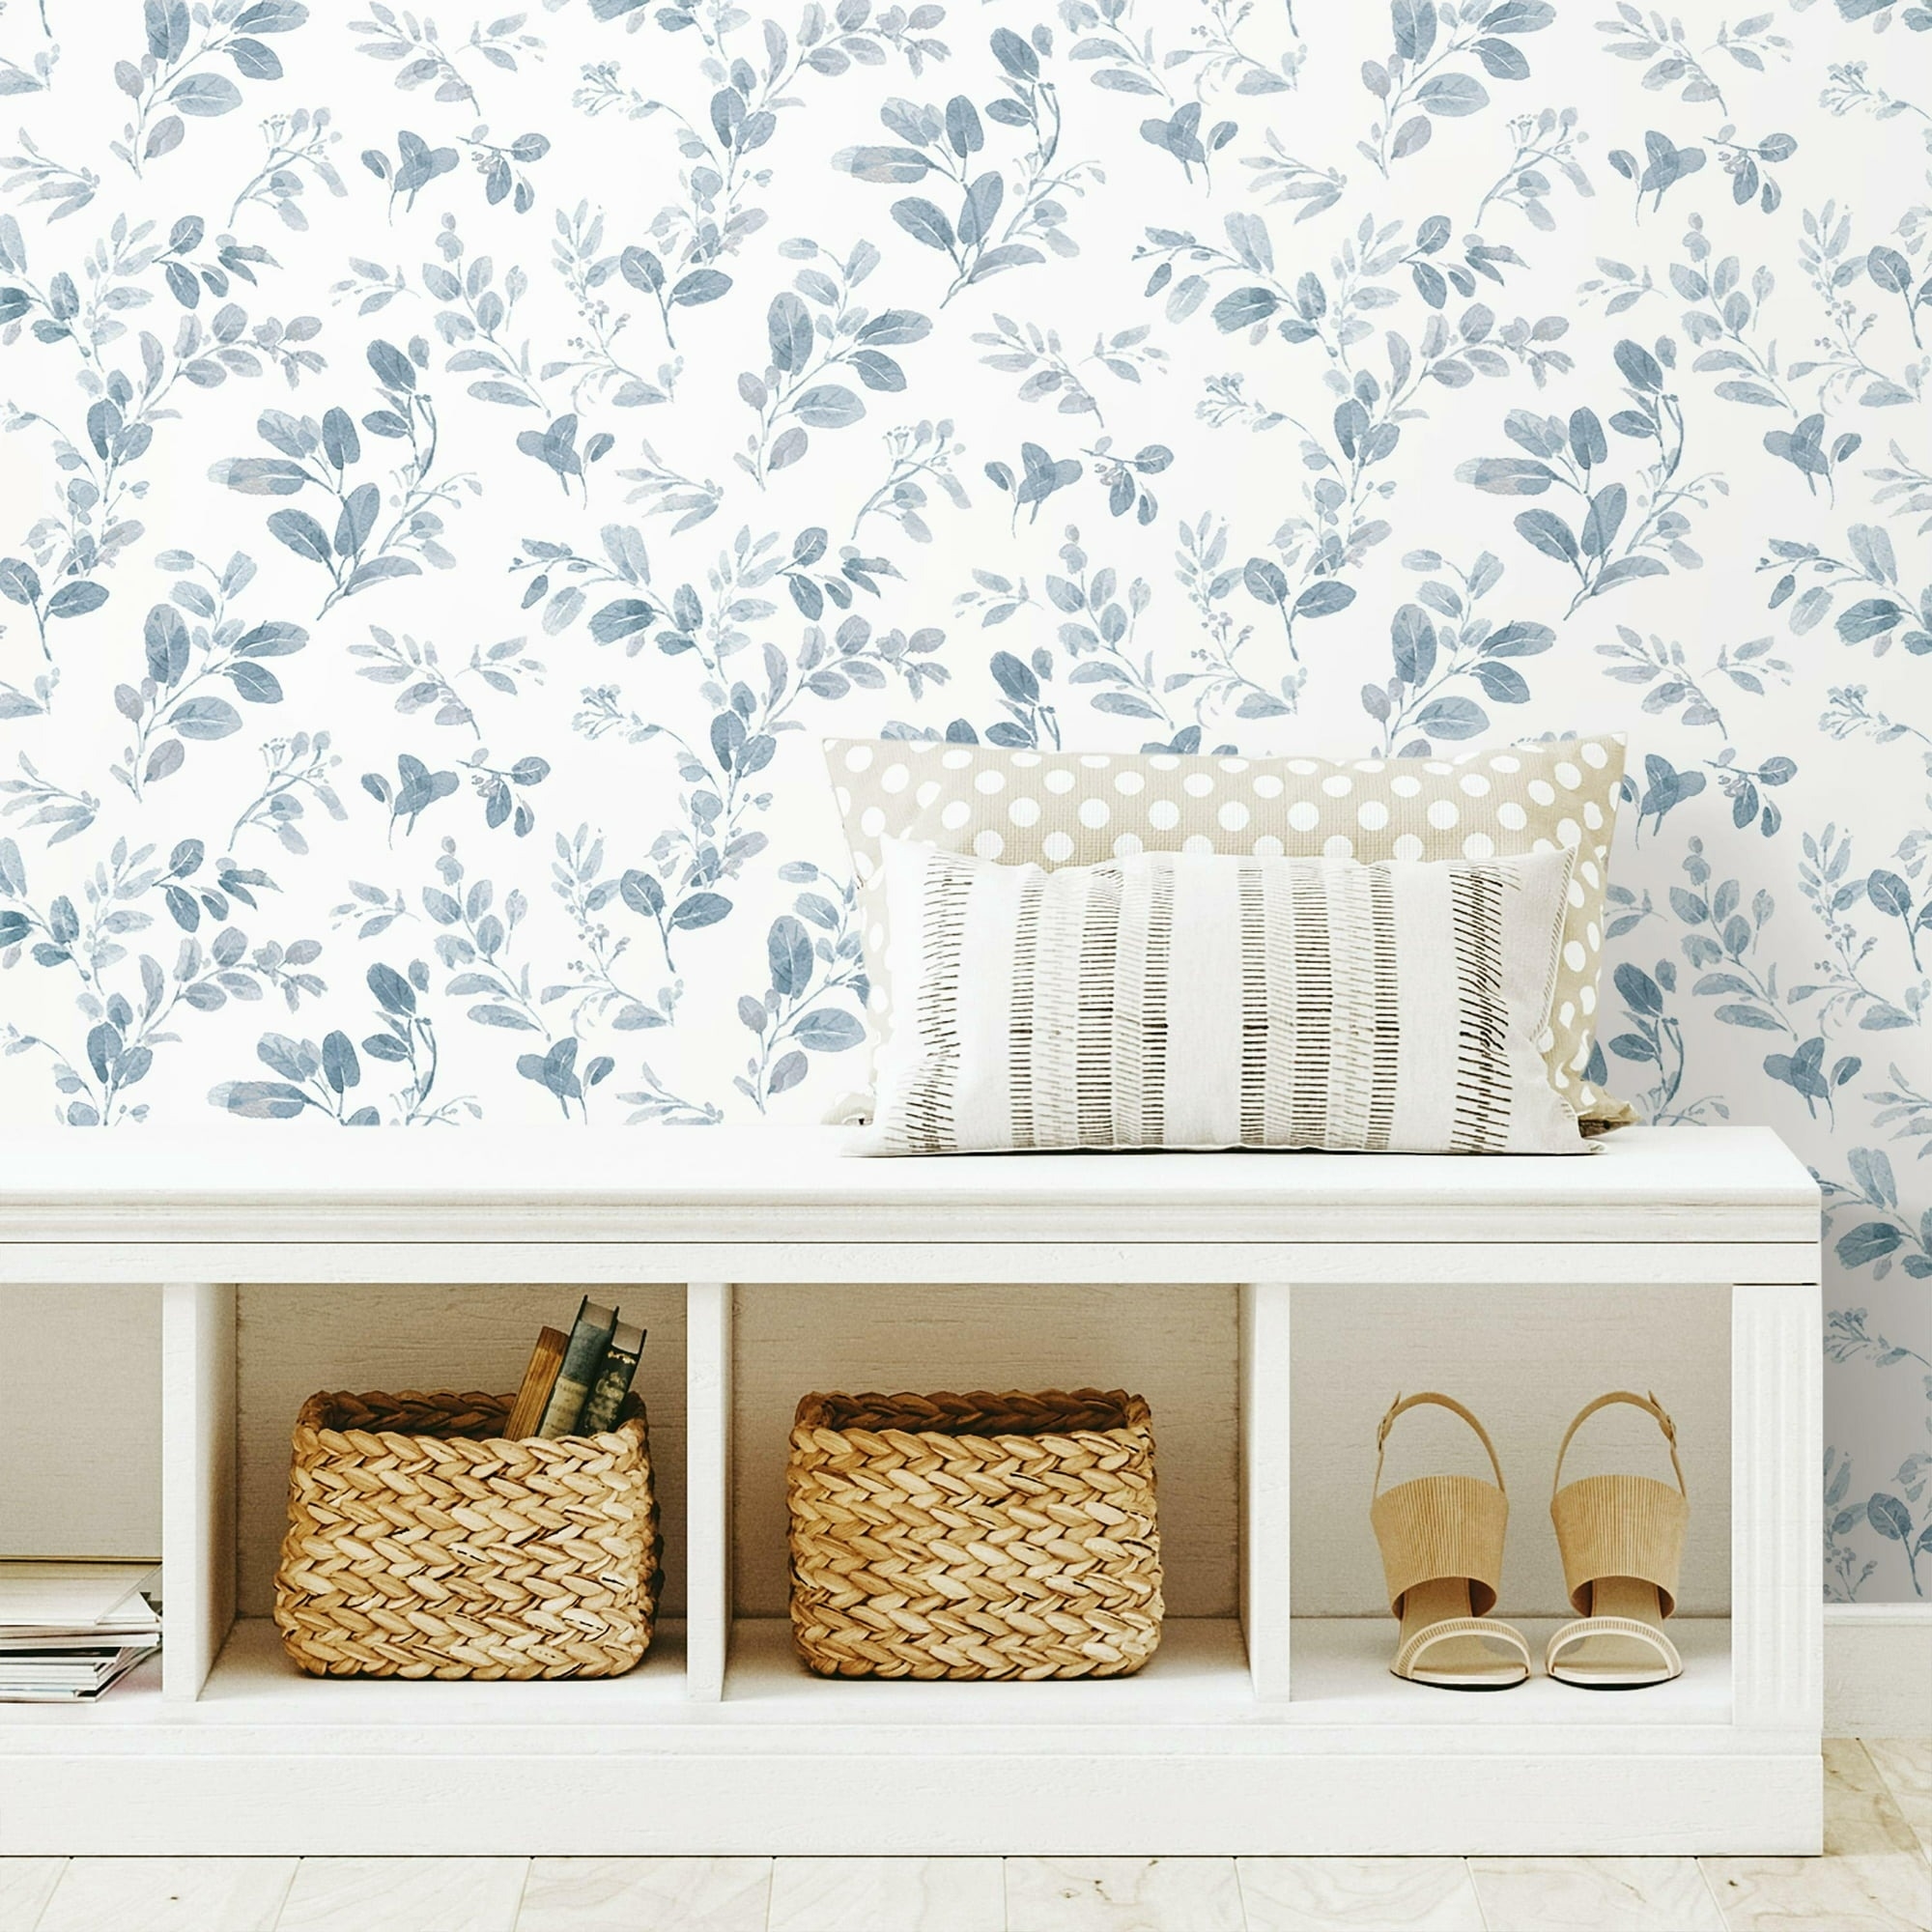 the white wallpaper with blue leaves on it in a room